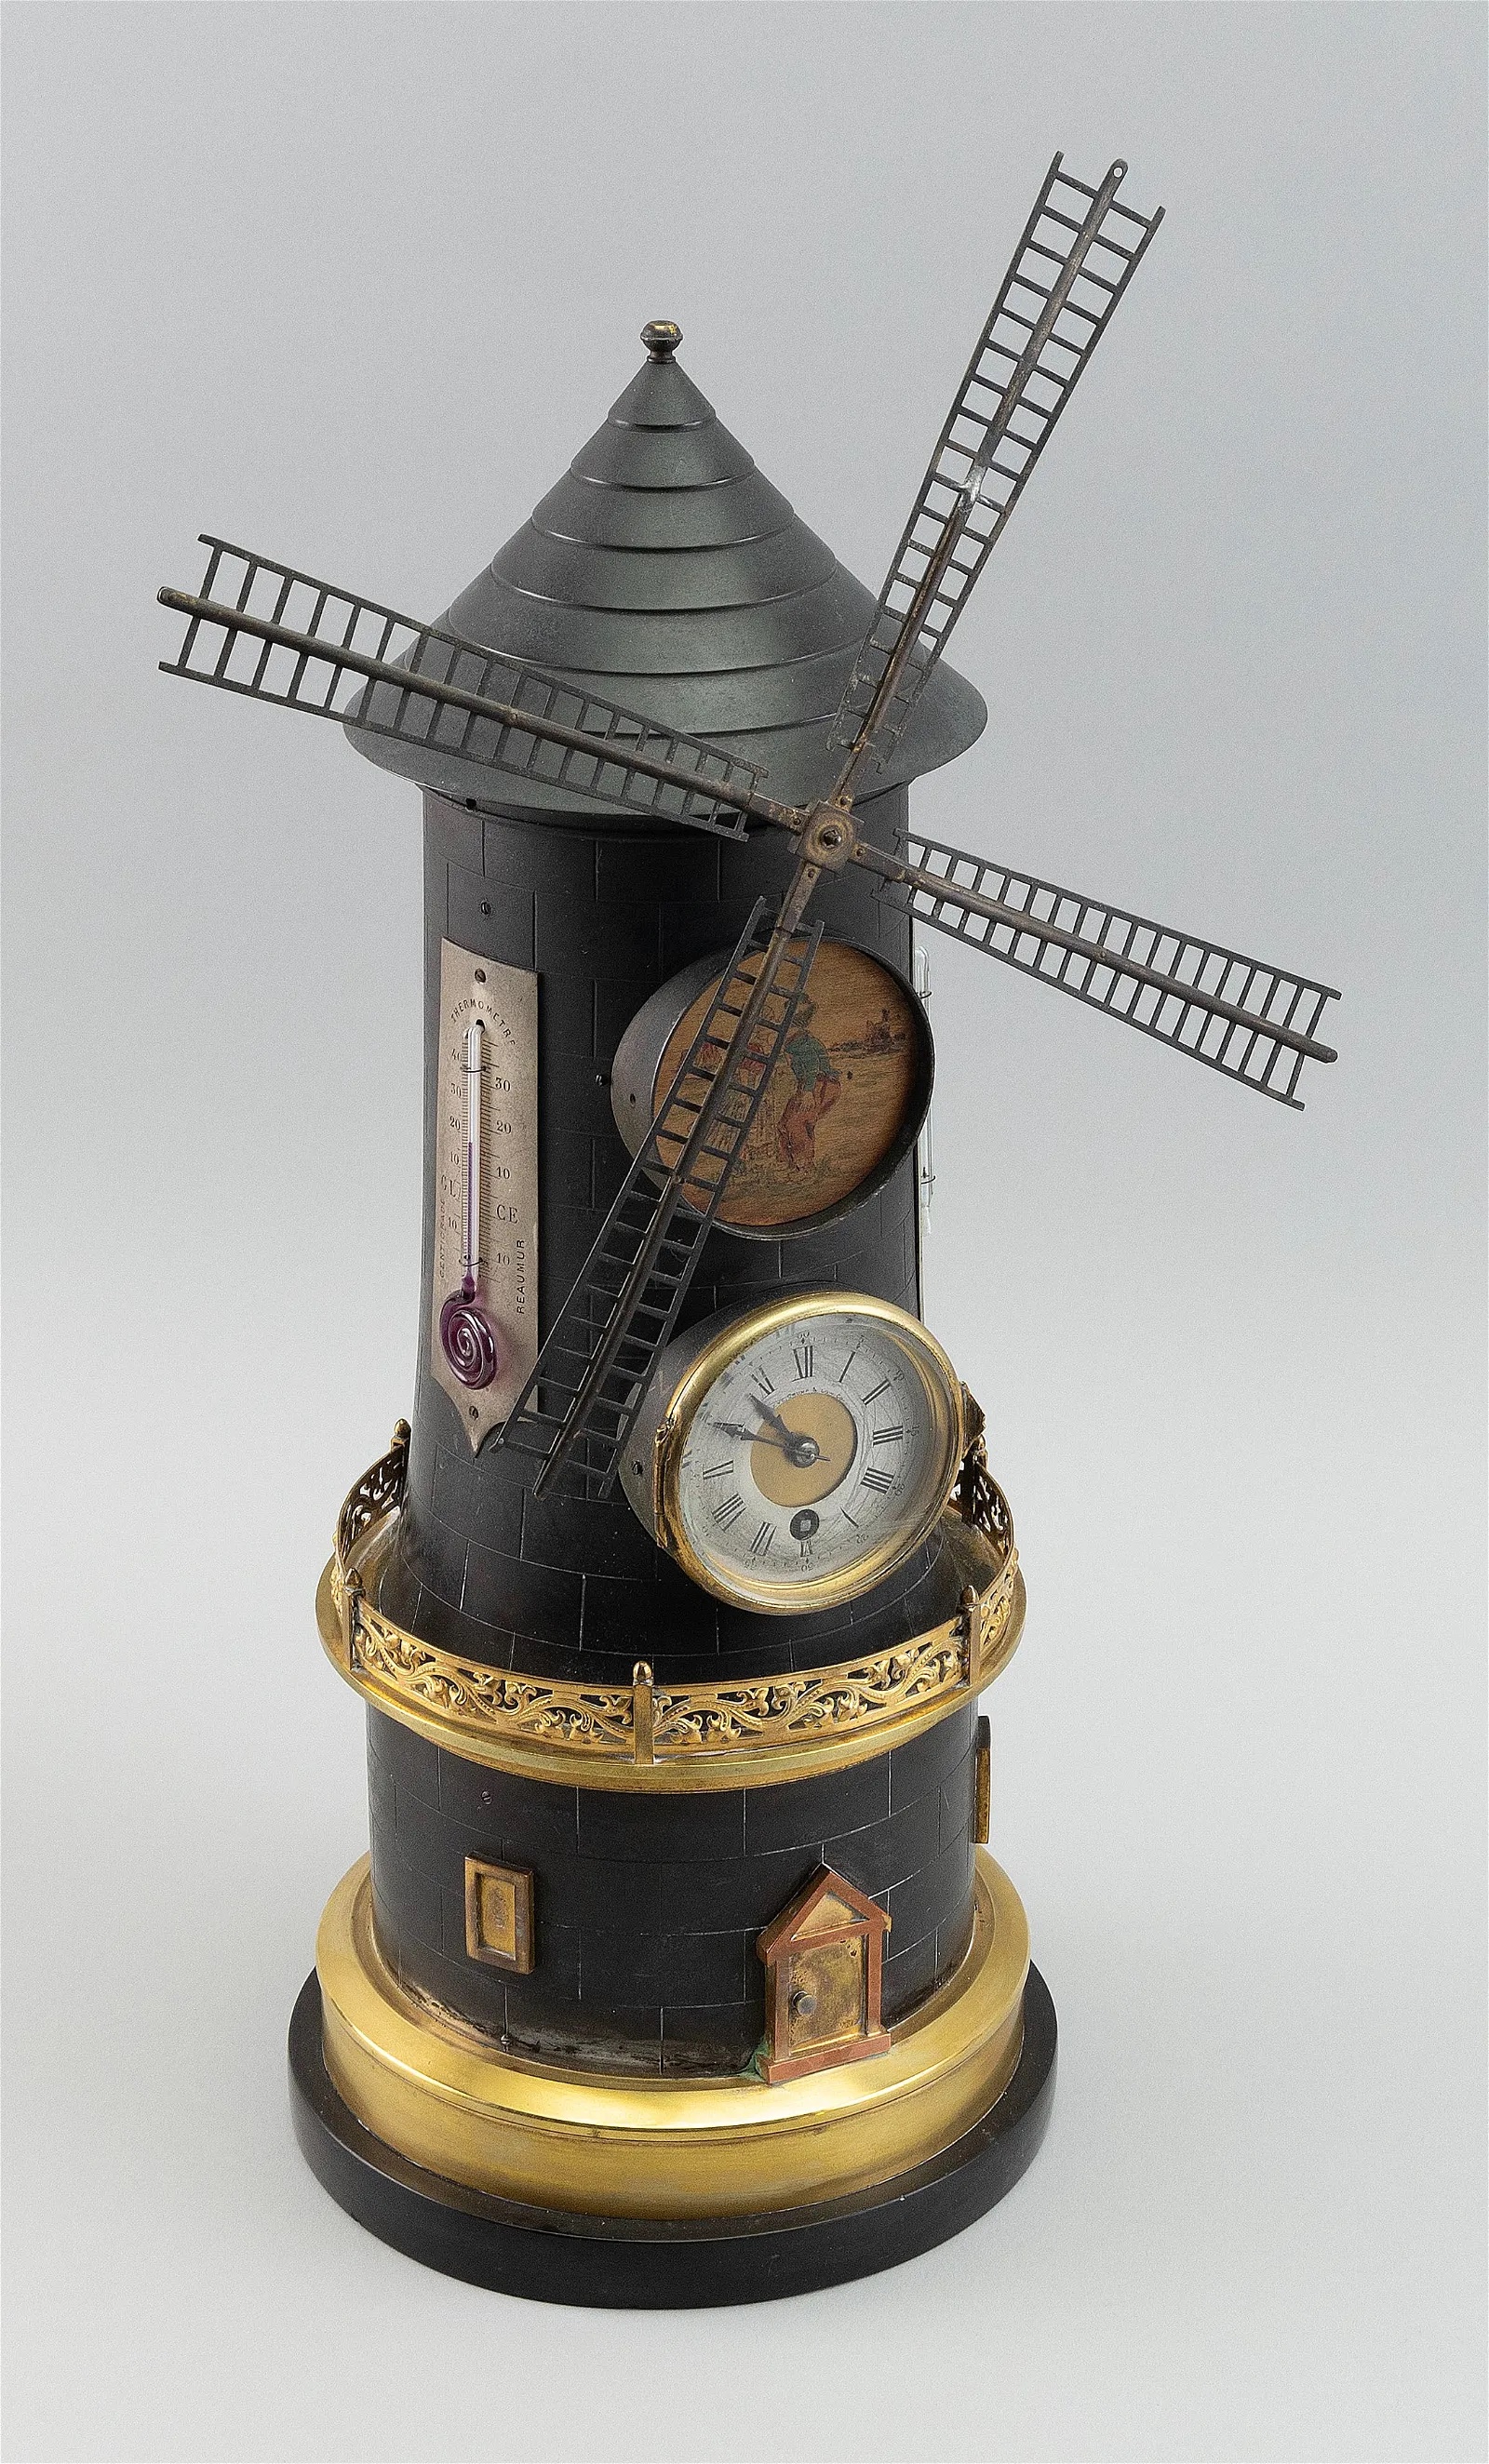 French Industry clock in the form of a windmill, estimated at $3,500-$5,000 at Eldred's.